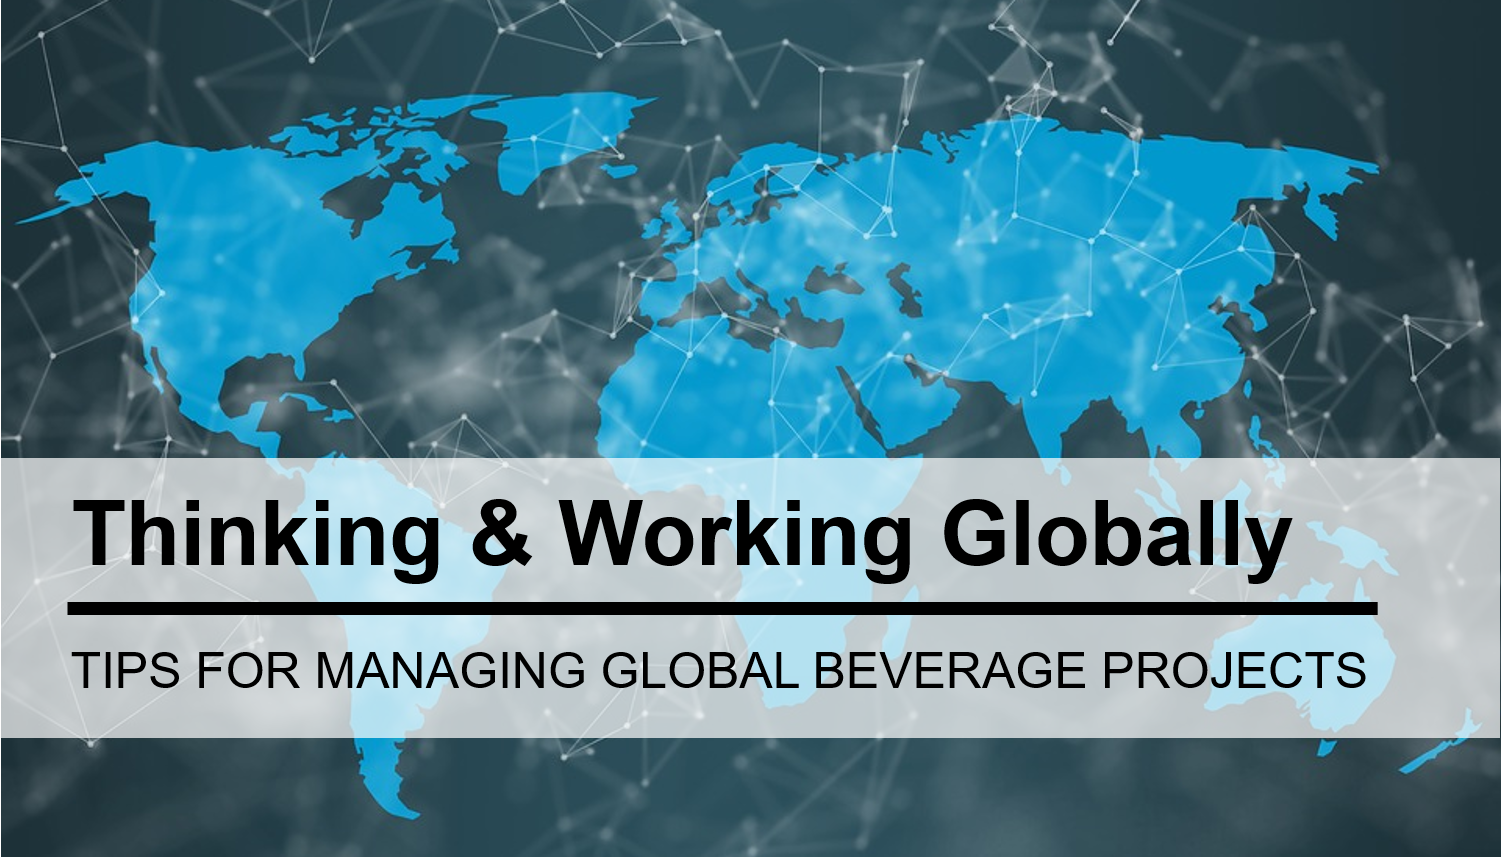 Global Beverage Industry - Tips for Managing Projects